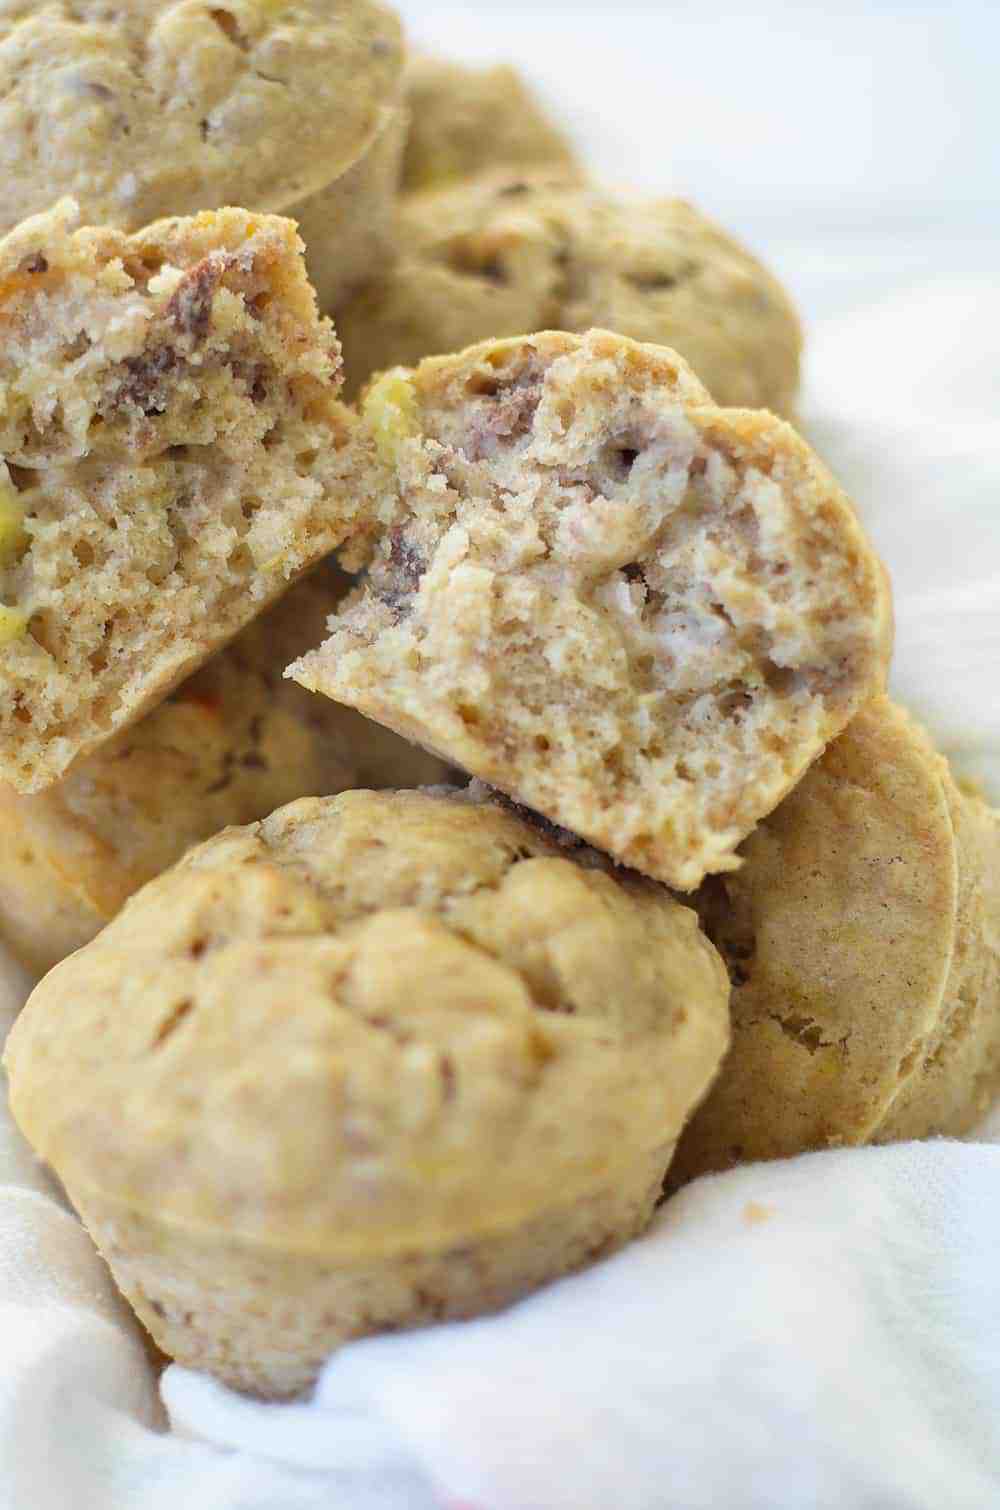 Healthy Banana Pecan Muffins! You are going to love these fluffy, moist muffins! Perfect for an afterschool snack or breakfast. | www.delishknowledge.com